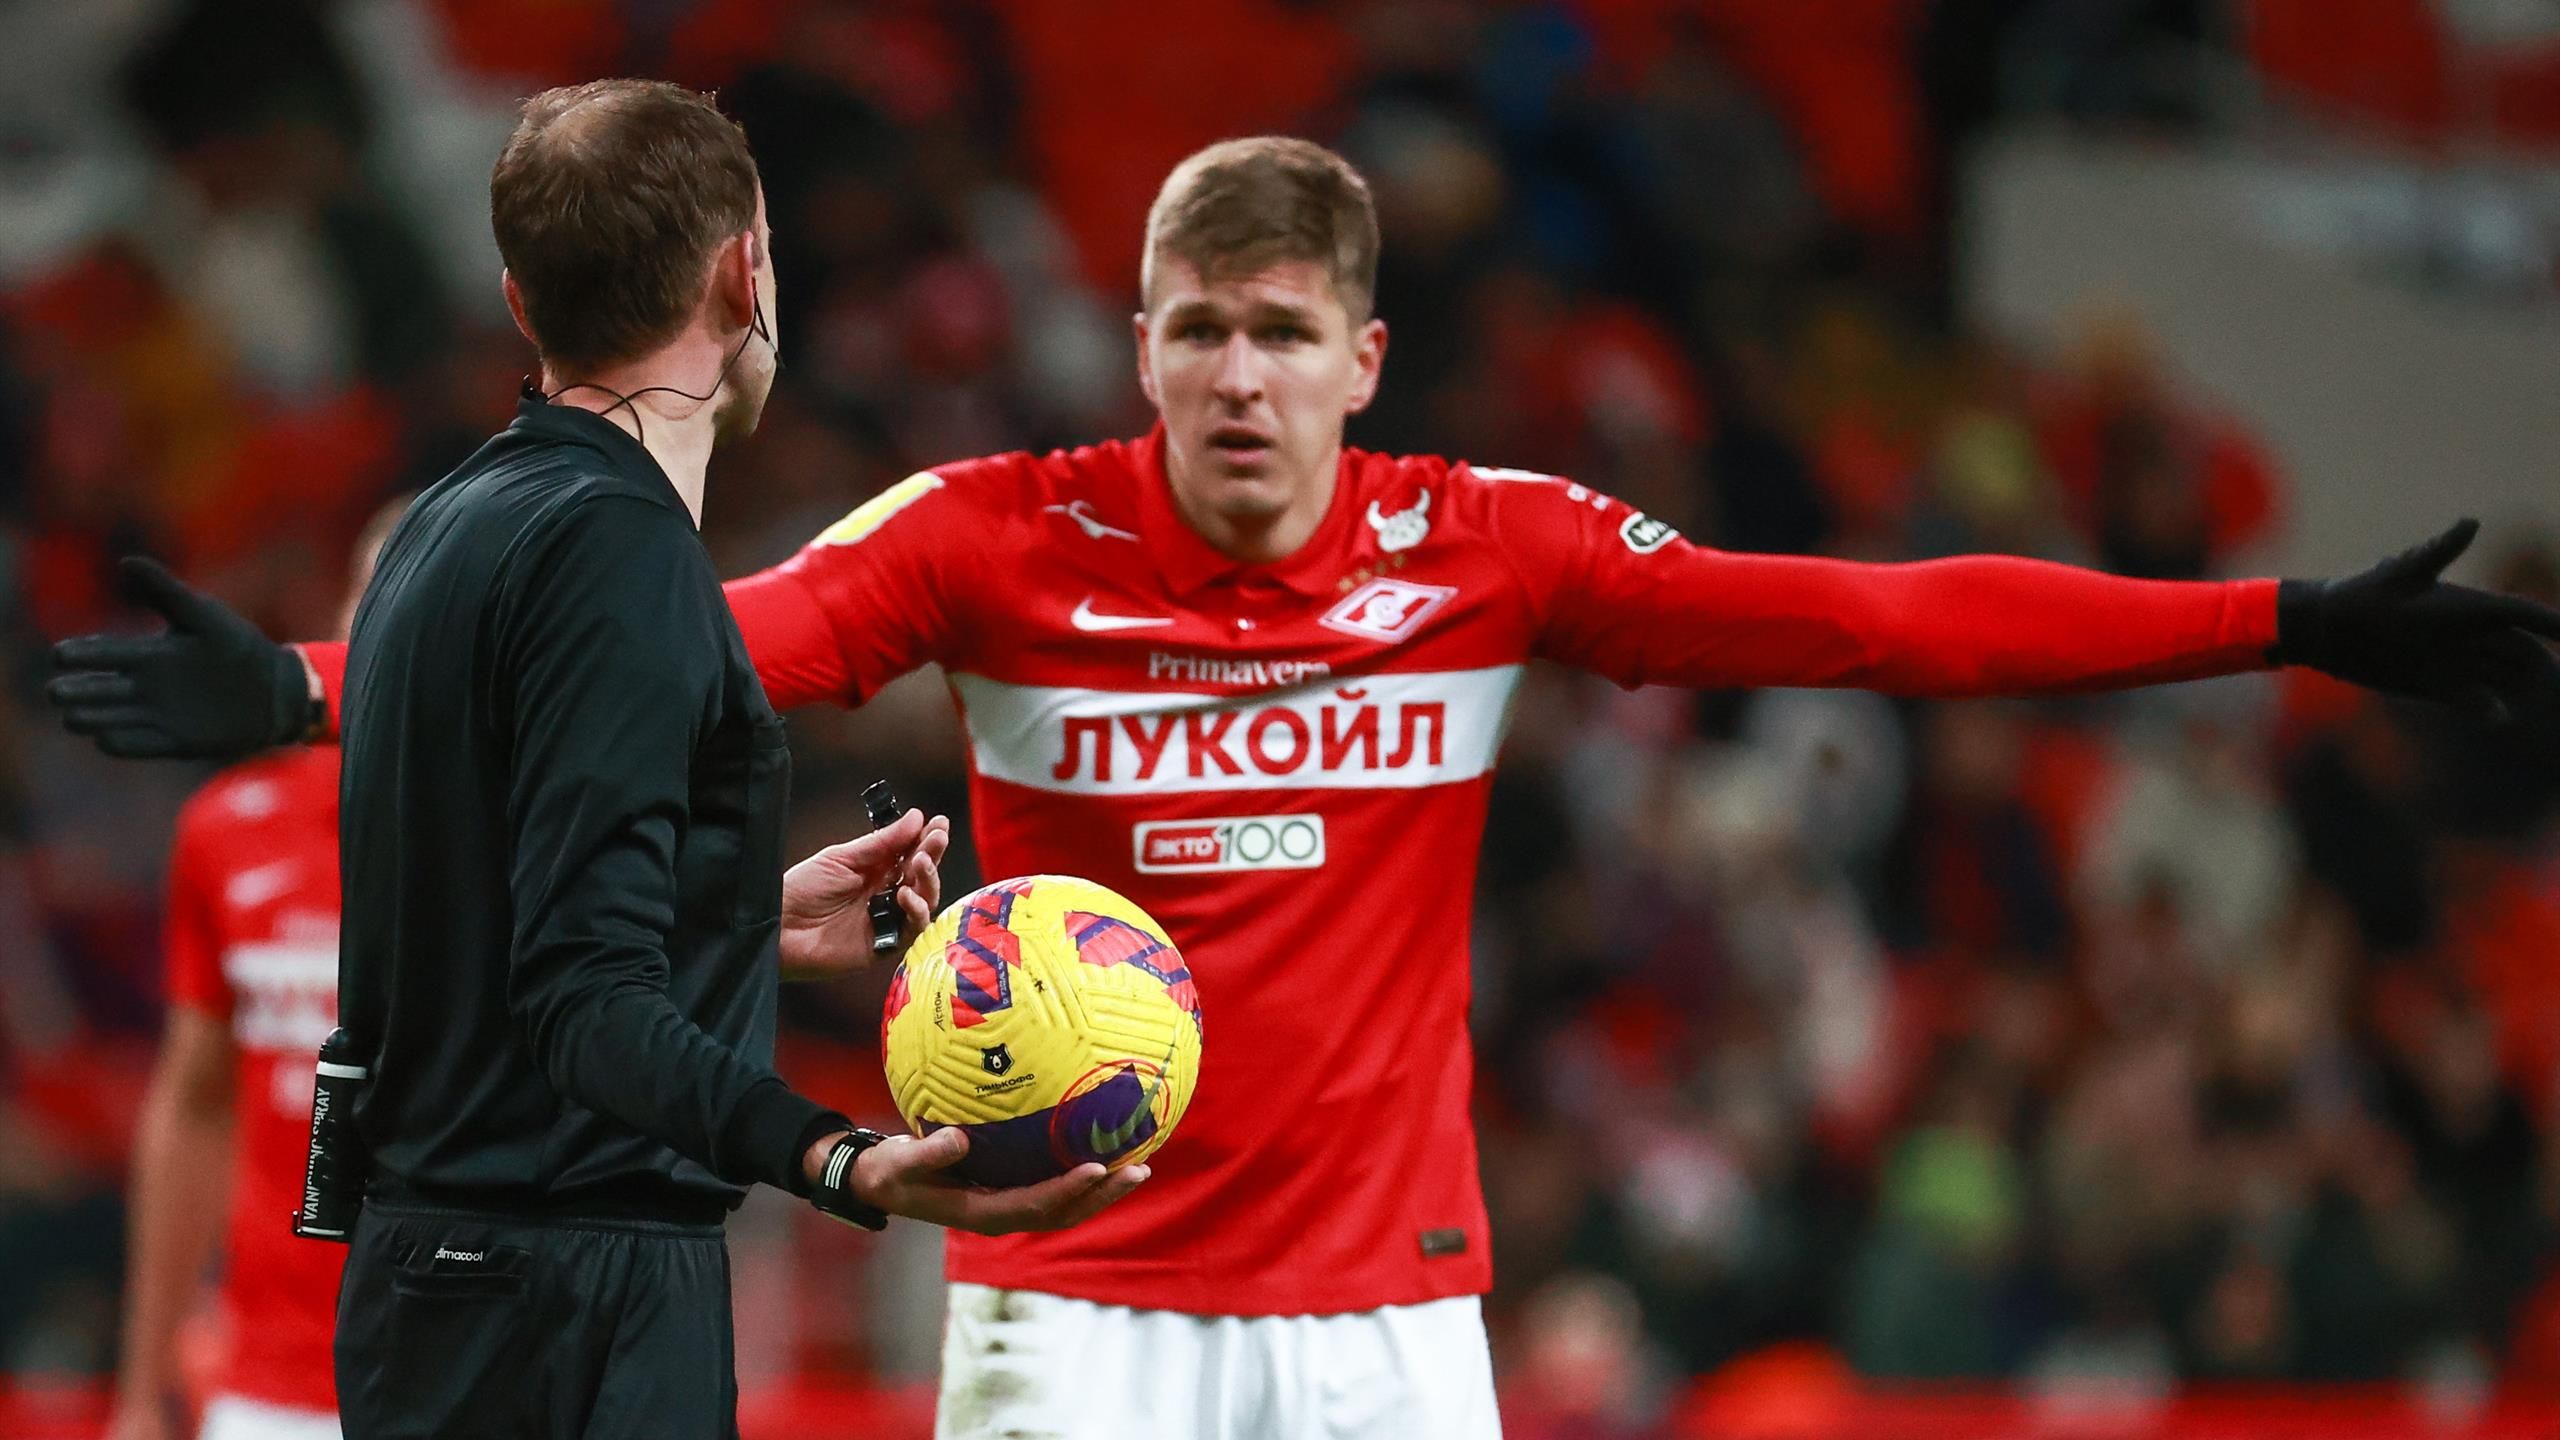 Russia thrown out of football as Spartak Moscow brand ban